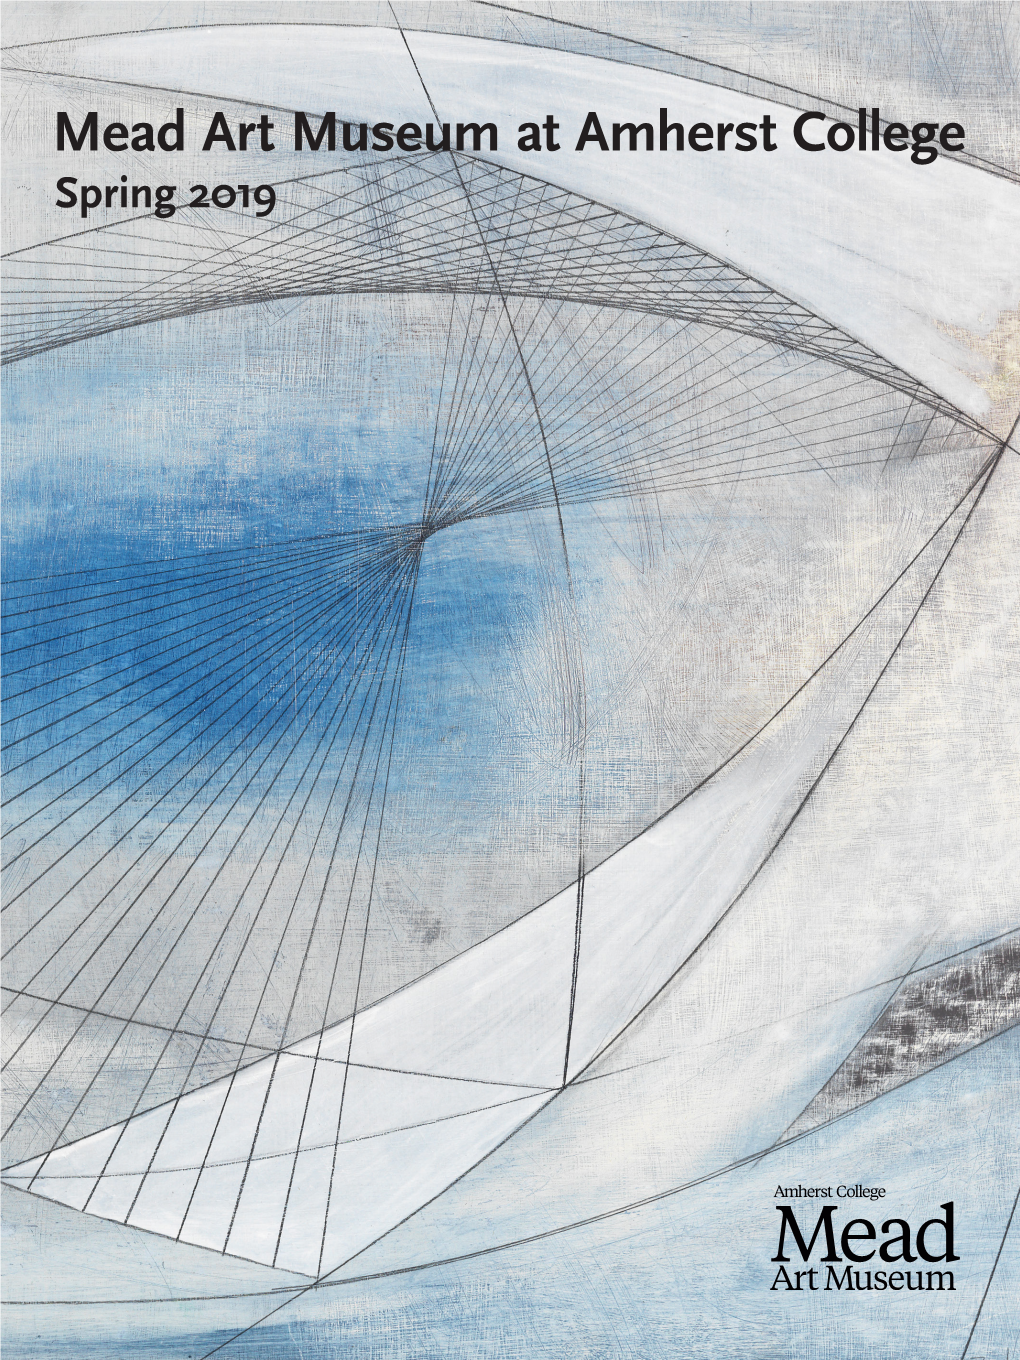 Mead Art Museum at Amherst College Spring 2019 Featuring Exhibitions